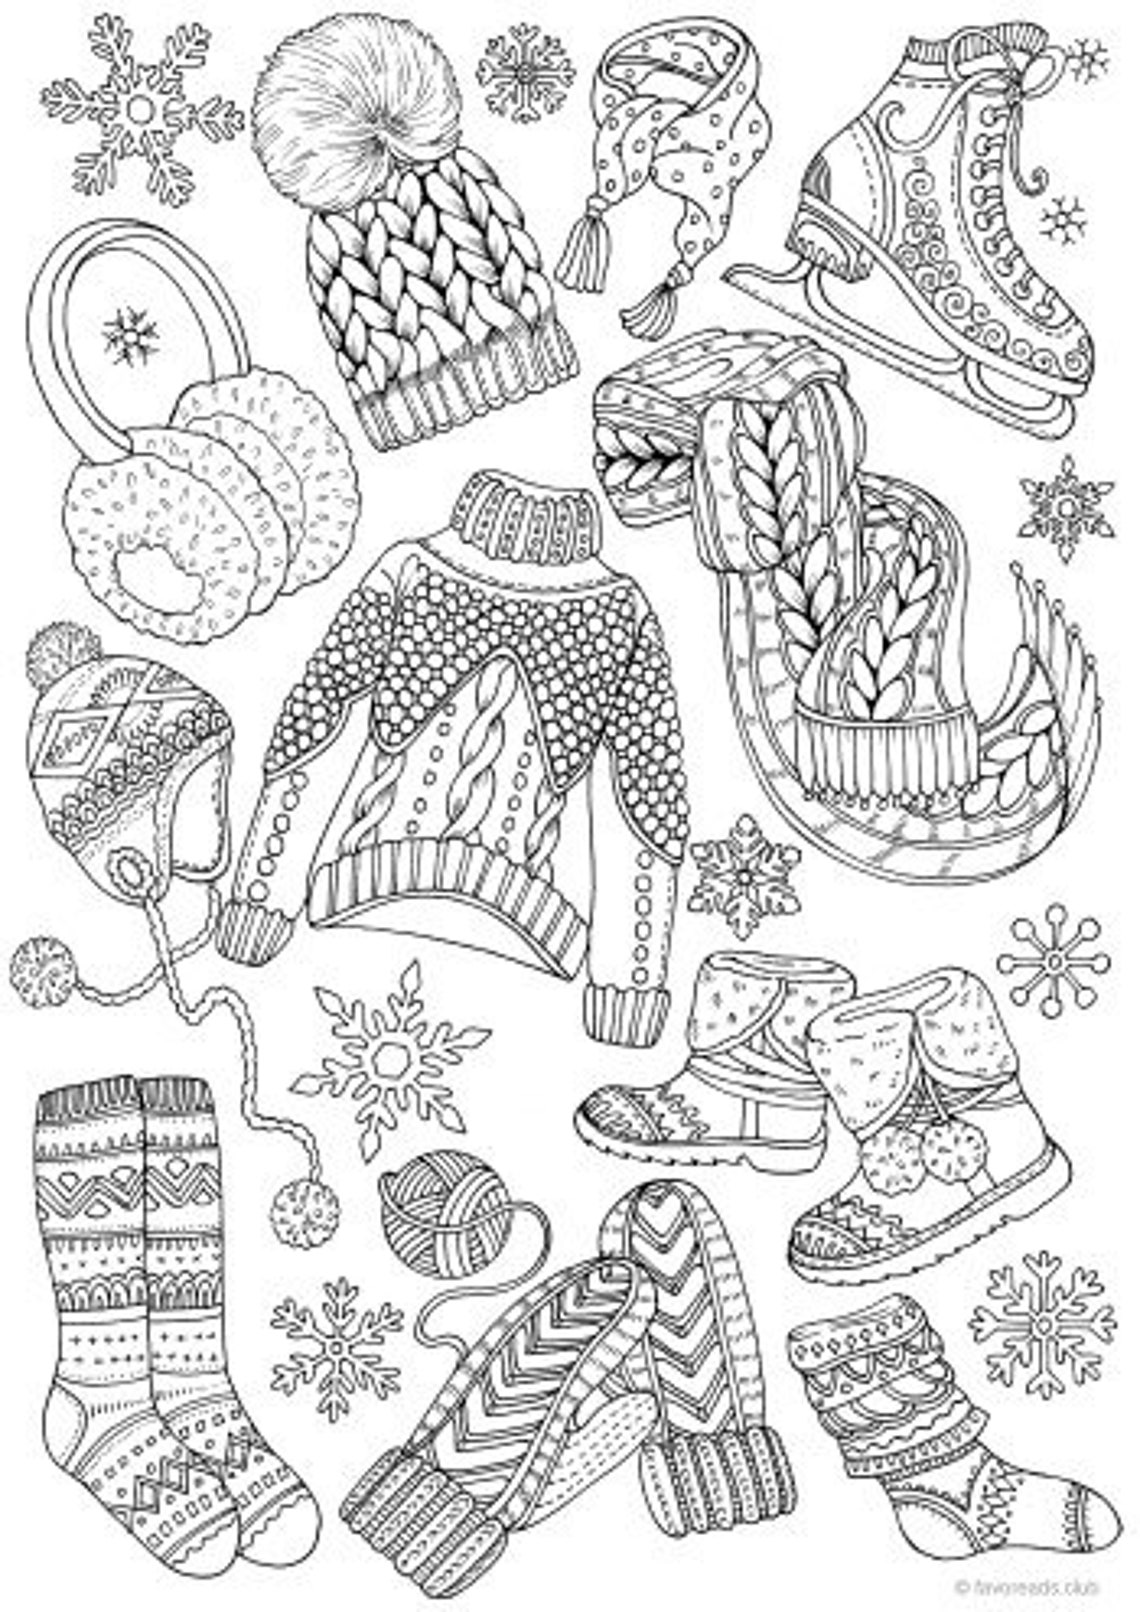 Winter Outfits Printable Adult Coloring Page From Favoreads | Etsy